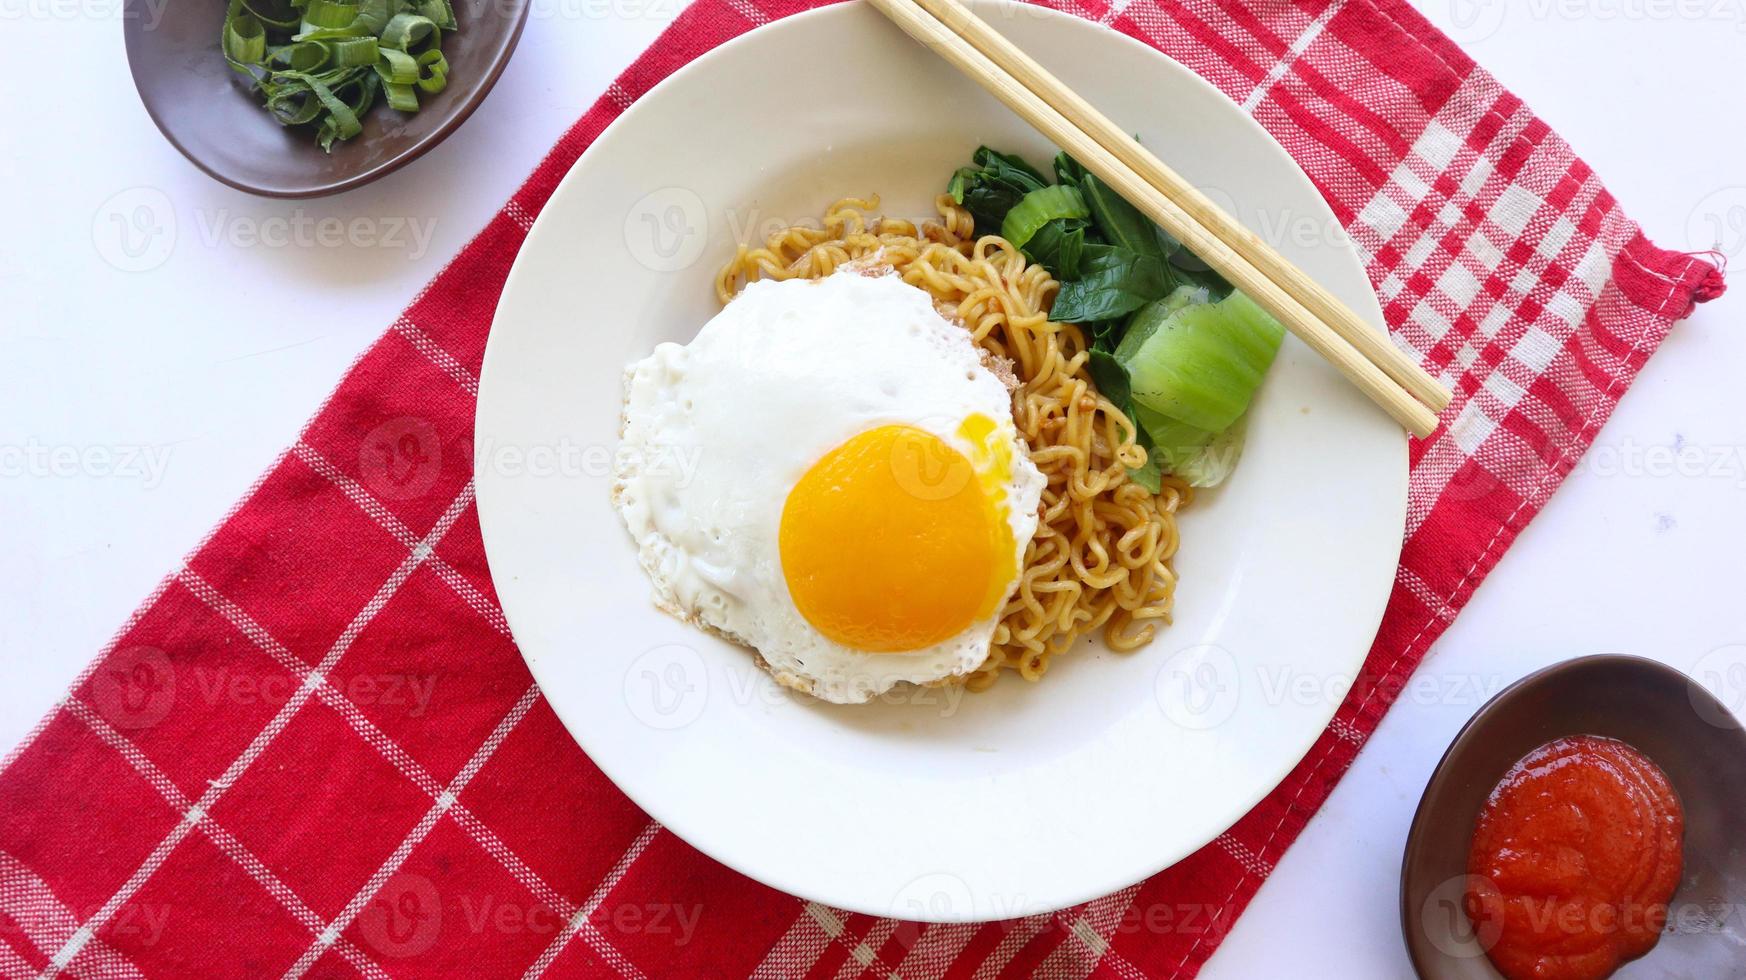 instant noodles served with egg fried and mustard greens on plate. instant fried noodle indomie photo